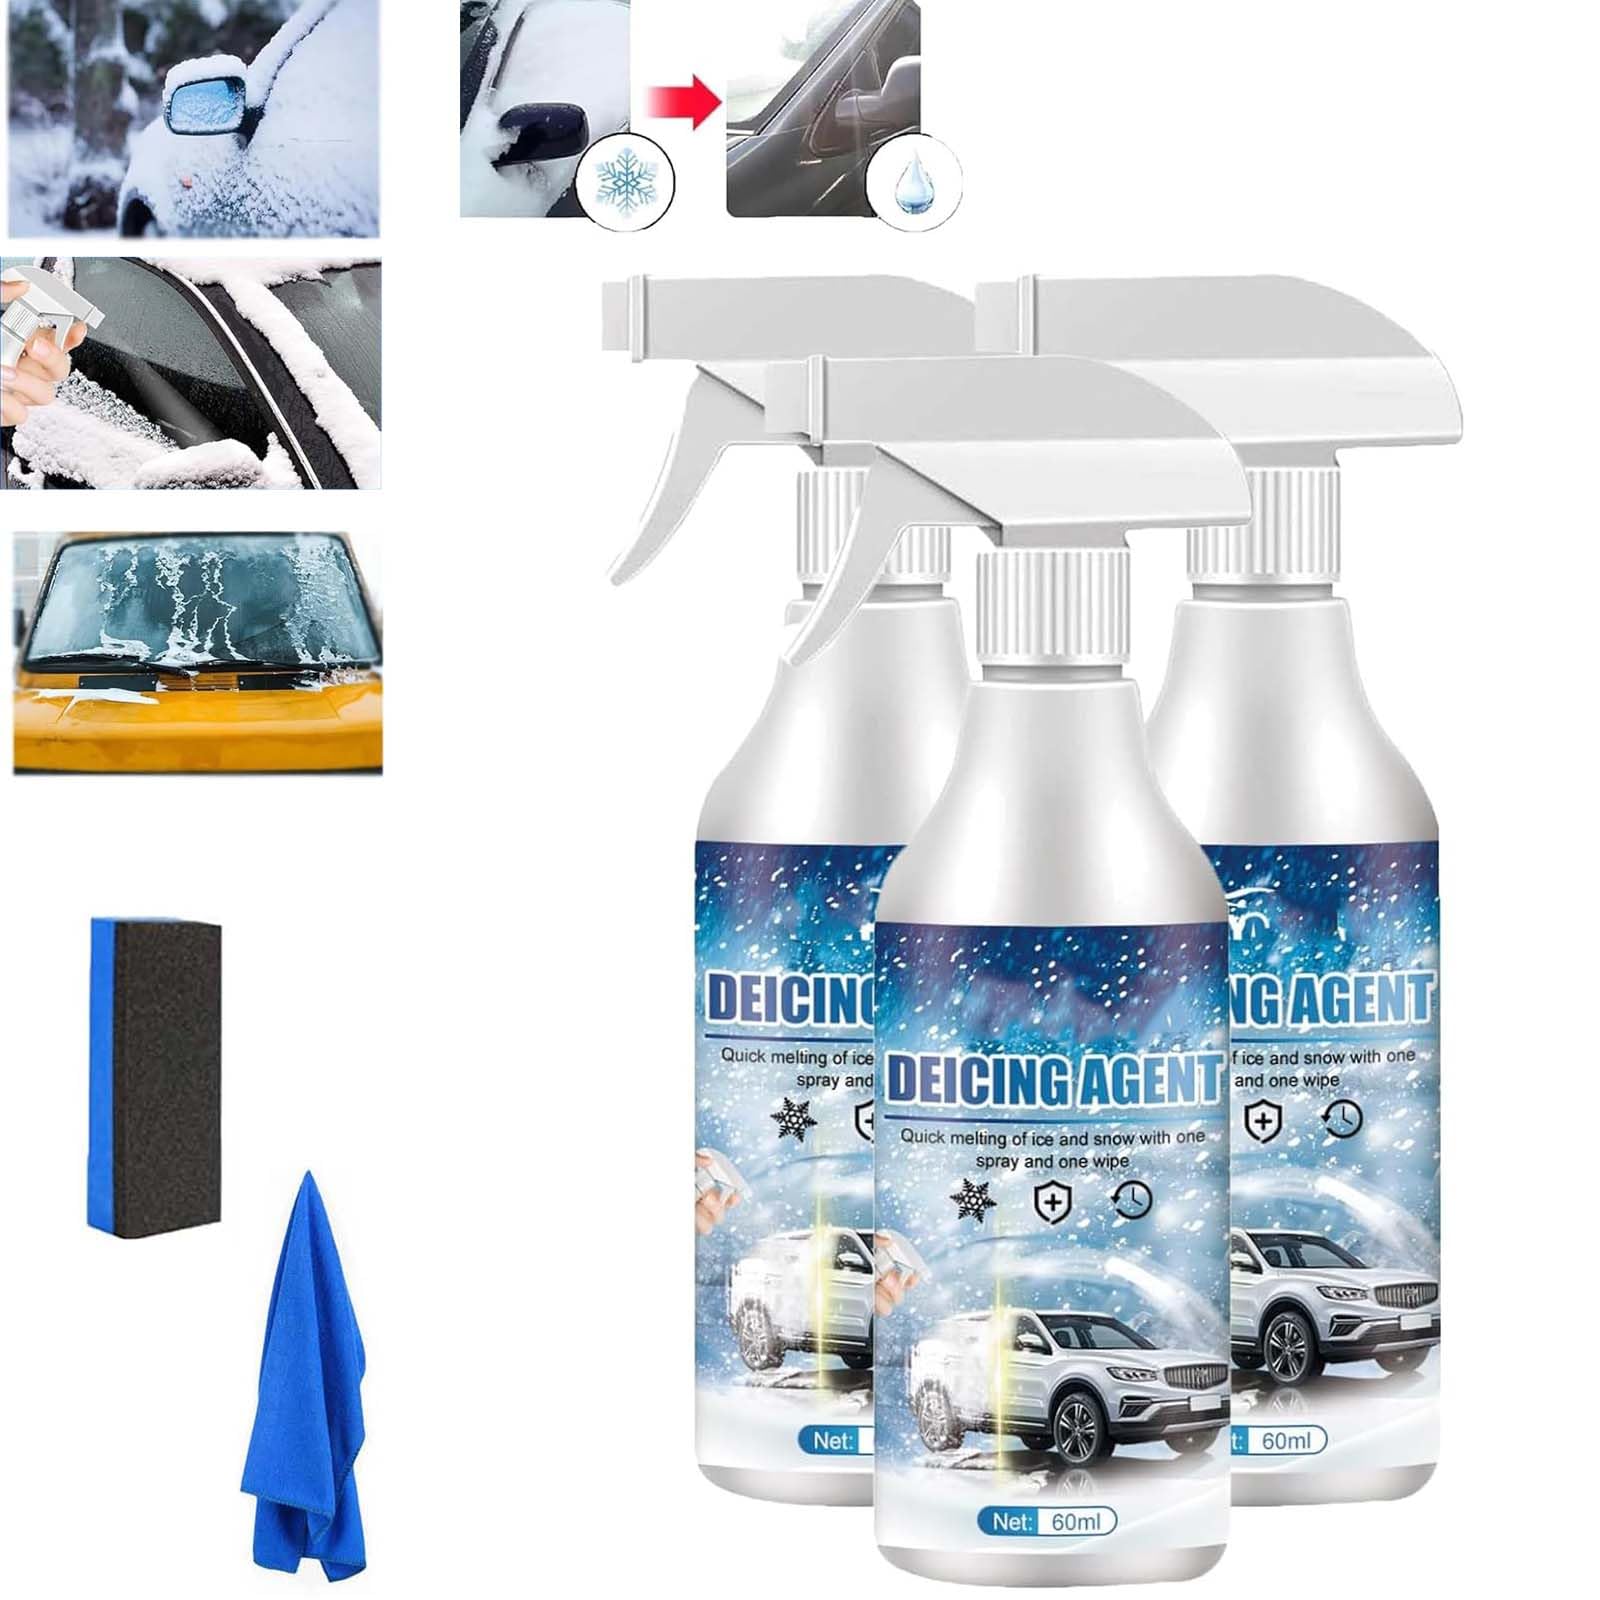 Deicer Spray for Car Windshield, Auto Windshield Deicing Spray, De-Icer Spray, Ice Remover Melting Spray Multi-Purpose Melters Winter Car Essentials for Fast Removing Snow, Ice and Frost (3 PCS) von HIDRUO